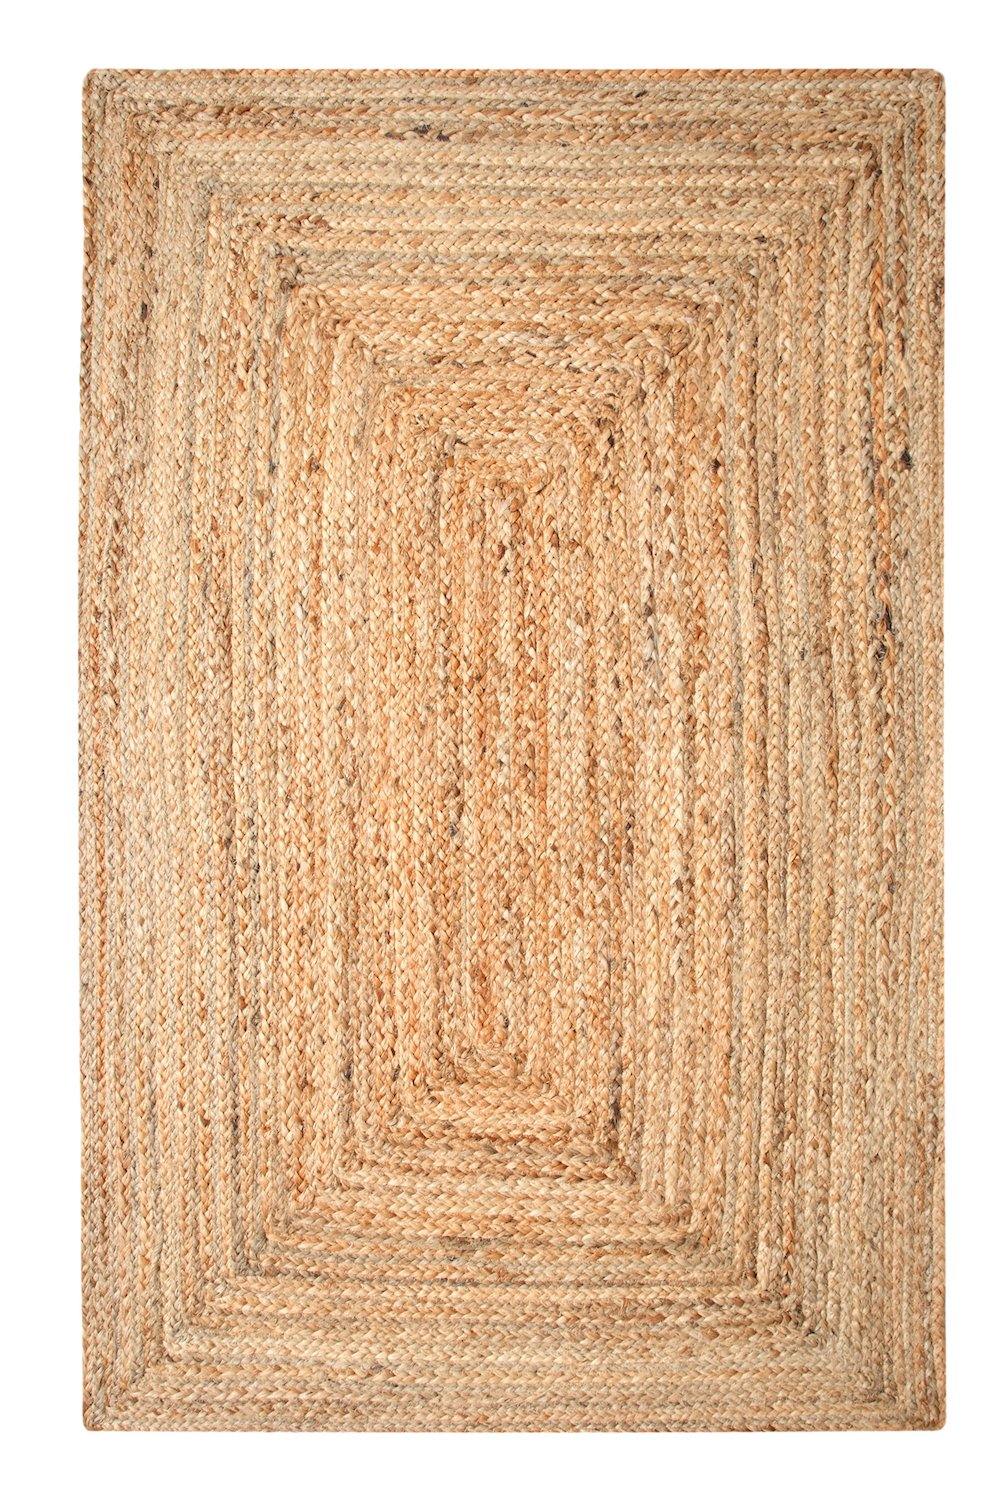 DHAKA Area Kitchen Rug Hand Woven Jute - Second Nature Online